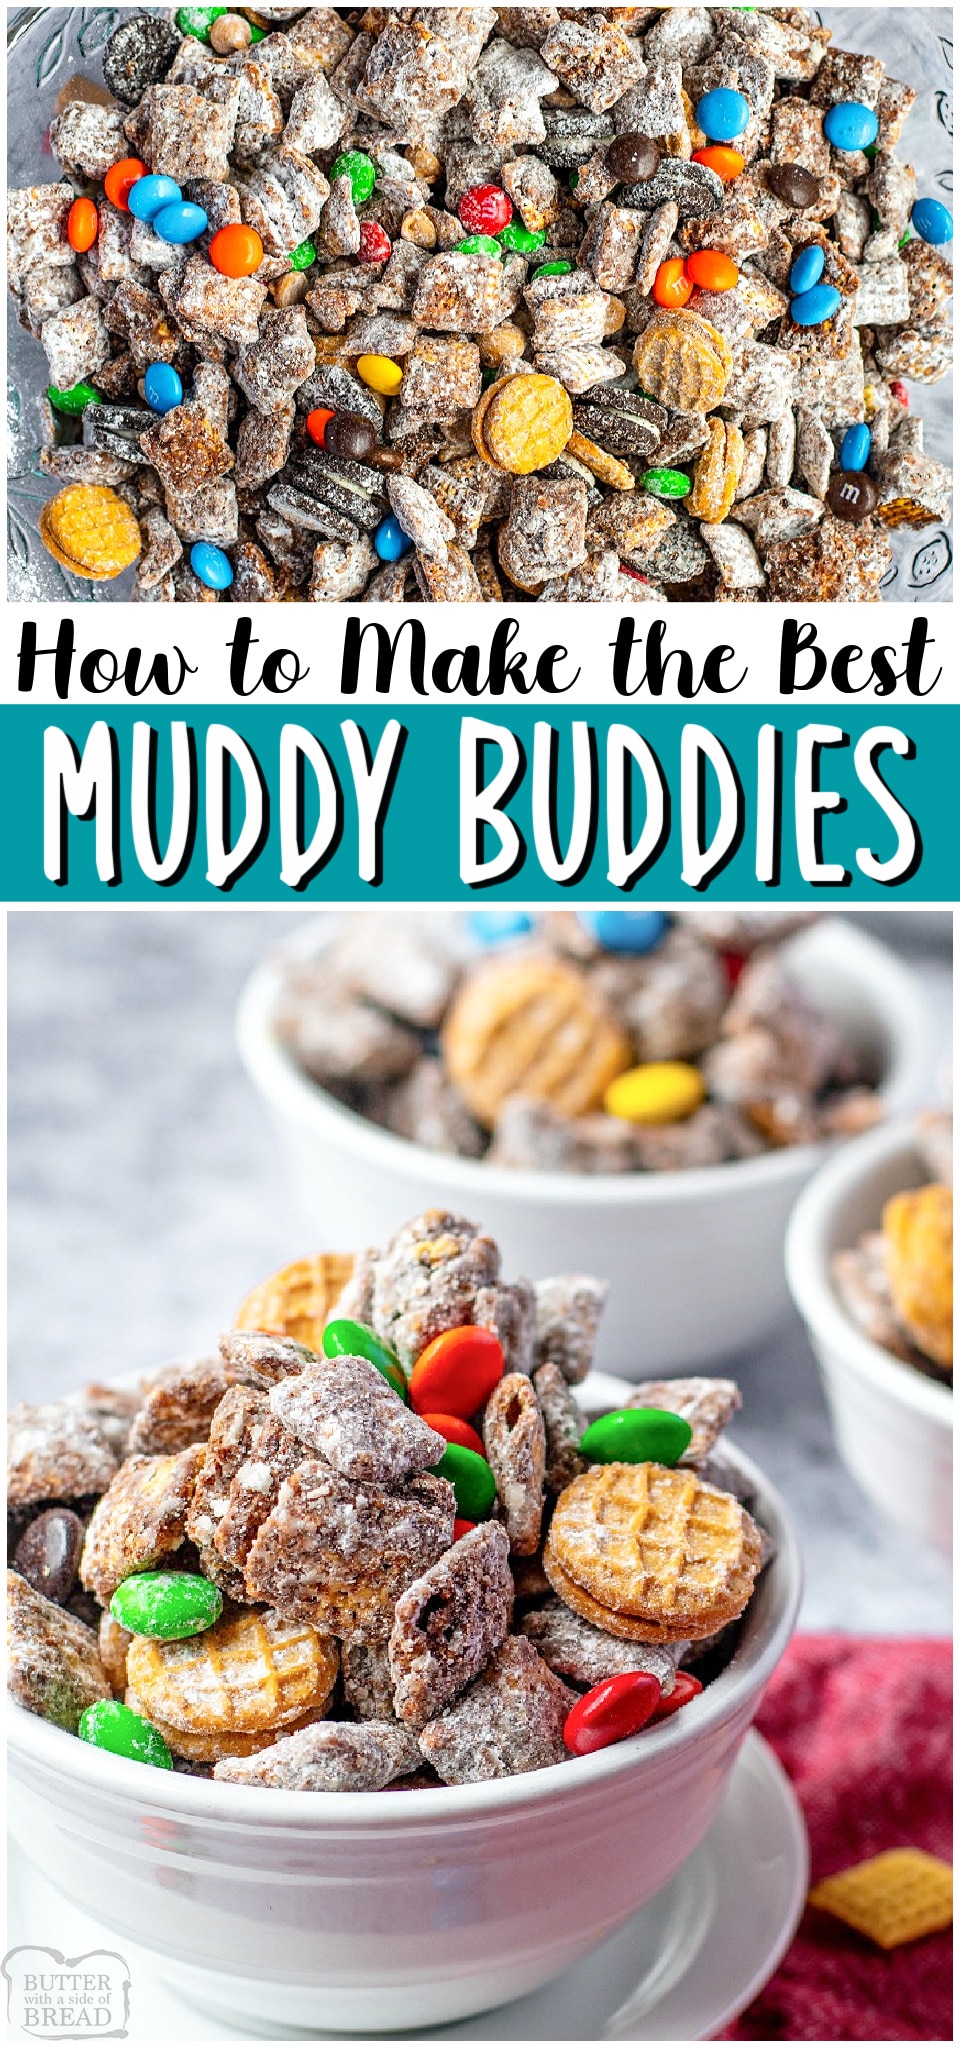 Come learn How to Make Muddy Buddies! Classic Chex cereal treat with delicious add-ins for a fun & tasty dessert snack mix that everyone loves! #muddybuddies #chexmix #dessert #snackmix #chex #easyrecipe from BUTTER WITH A SIDE OF BREAD